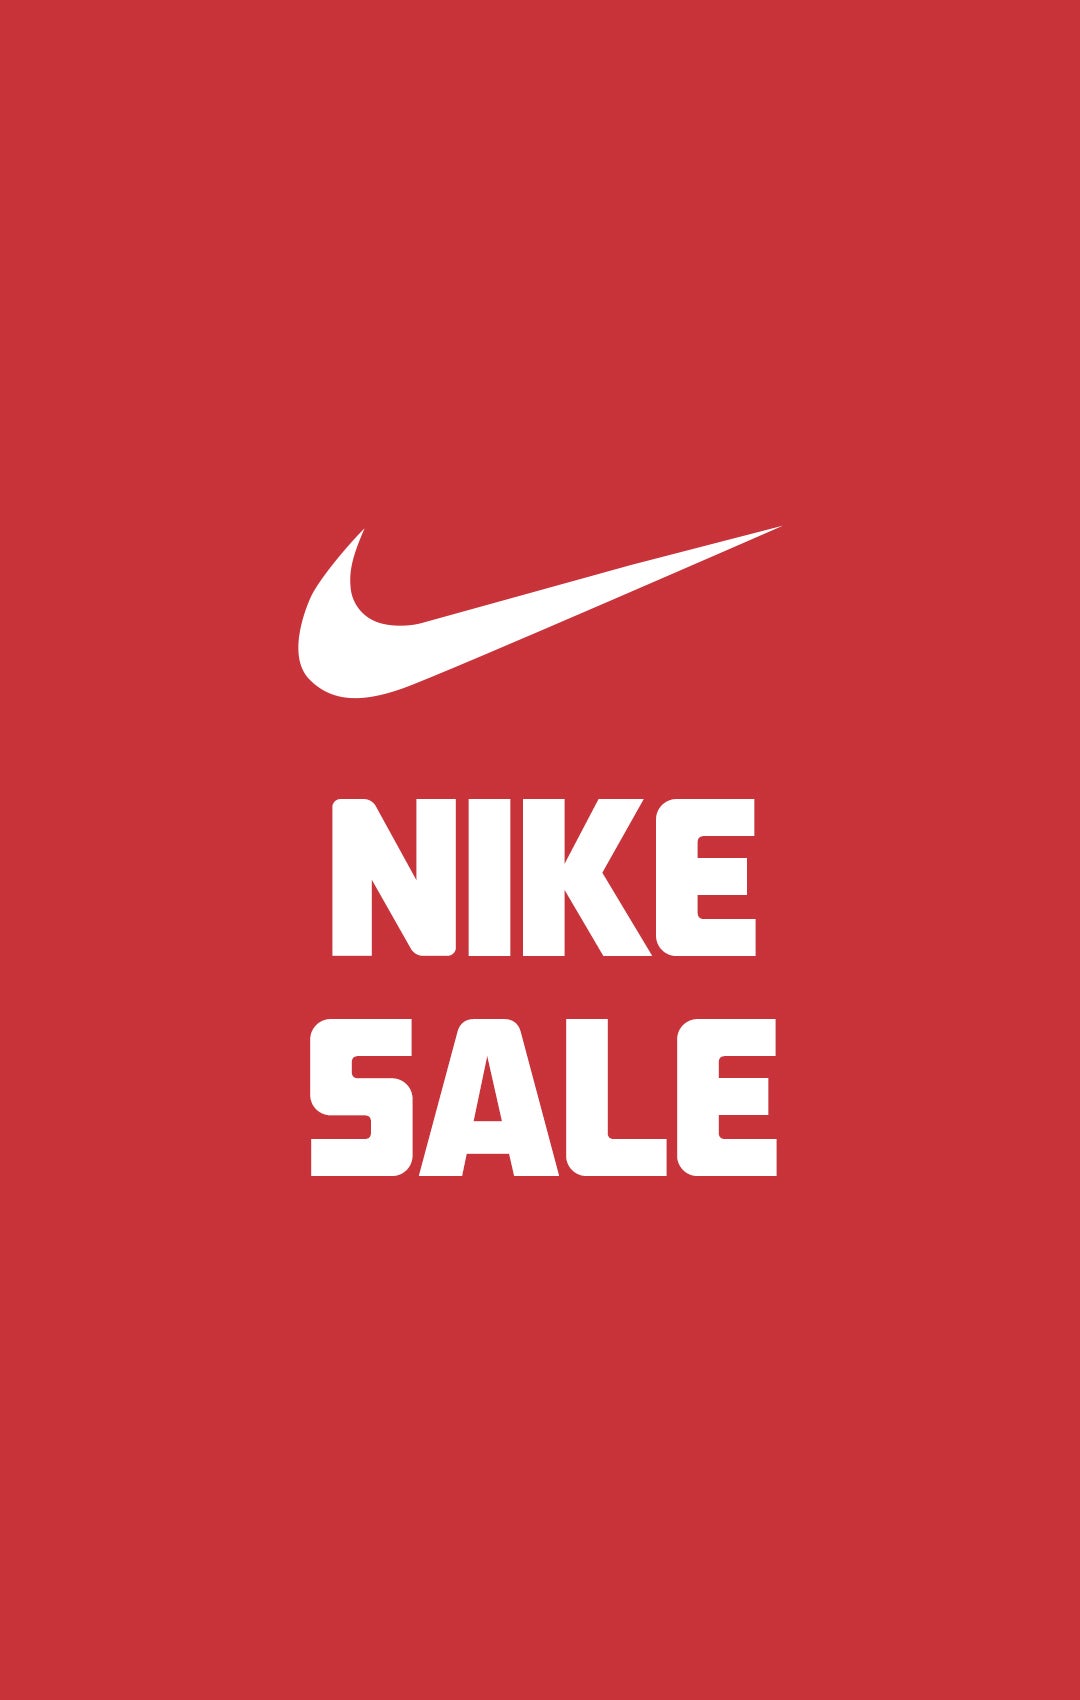 Sale Shoes, Clothing, Accessories, & Equipment